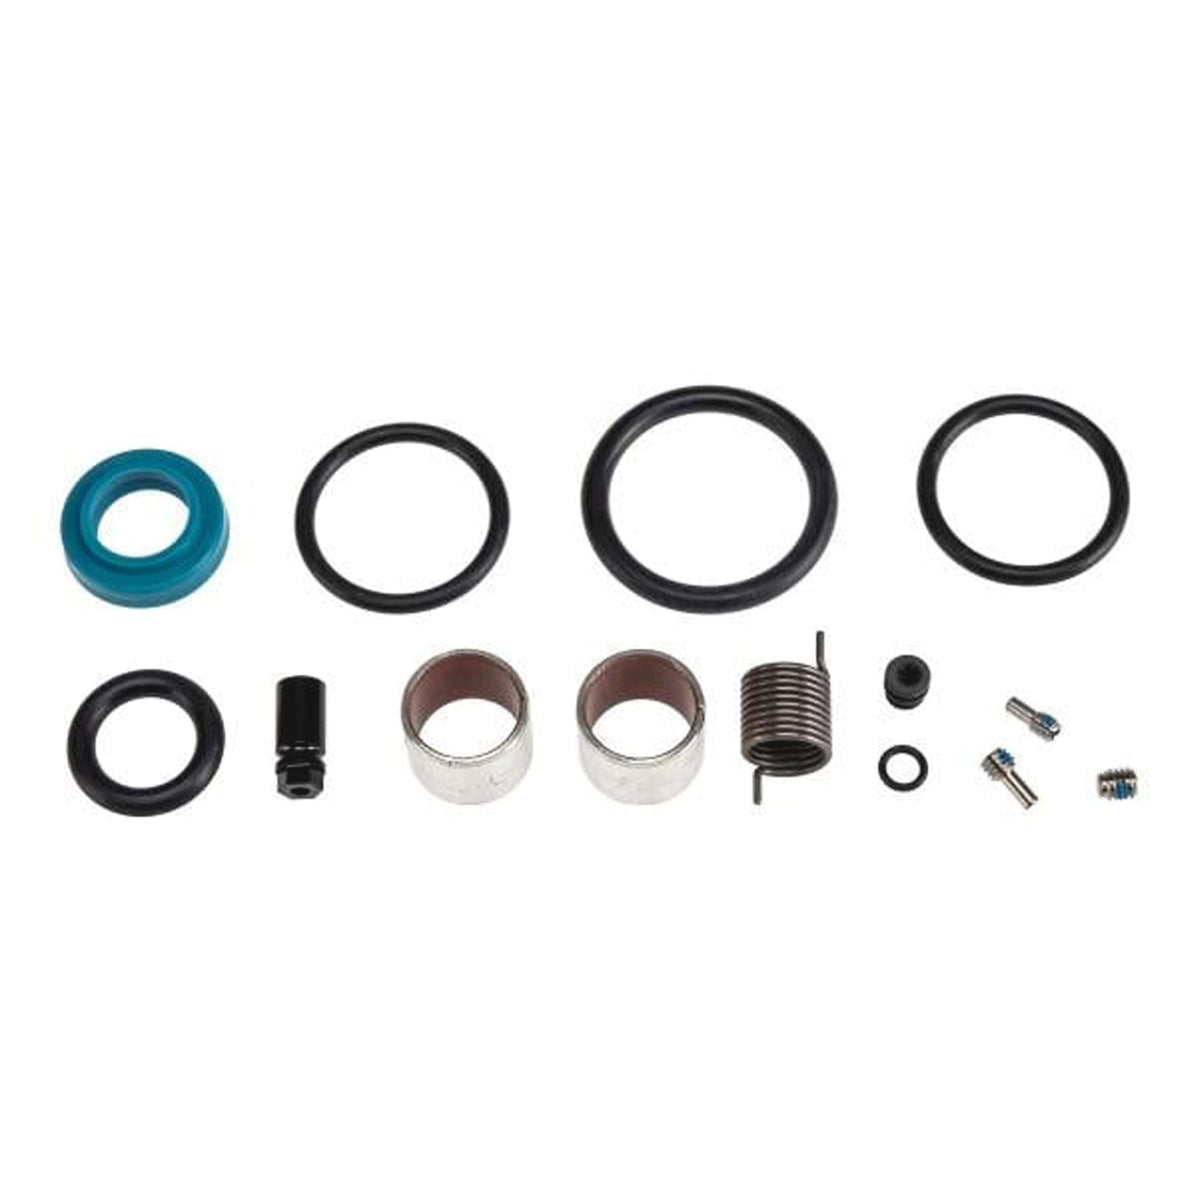 ROCKSHOX SERVICE - 200 HOUR/1 YEAR SERVICE KIT (INCLUDES SEALHEAD SEALS, PISTON SEAL, GLIDE RINGS, IFP SEALS, REMOTE SPARES, GREASE) - SUPER DELUXE COIL REMOTE (2018+)